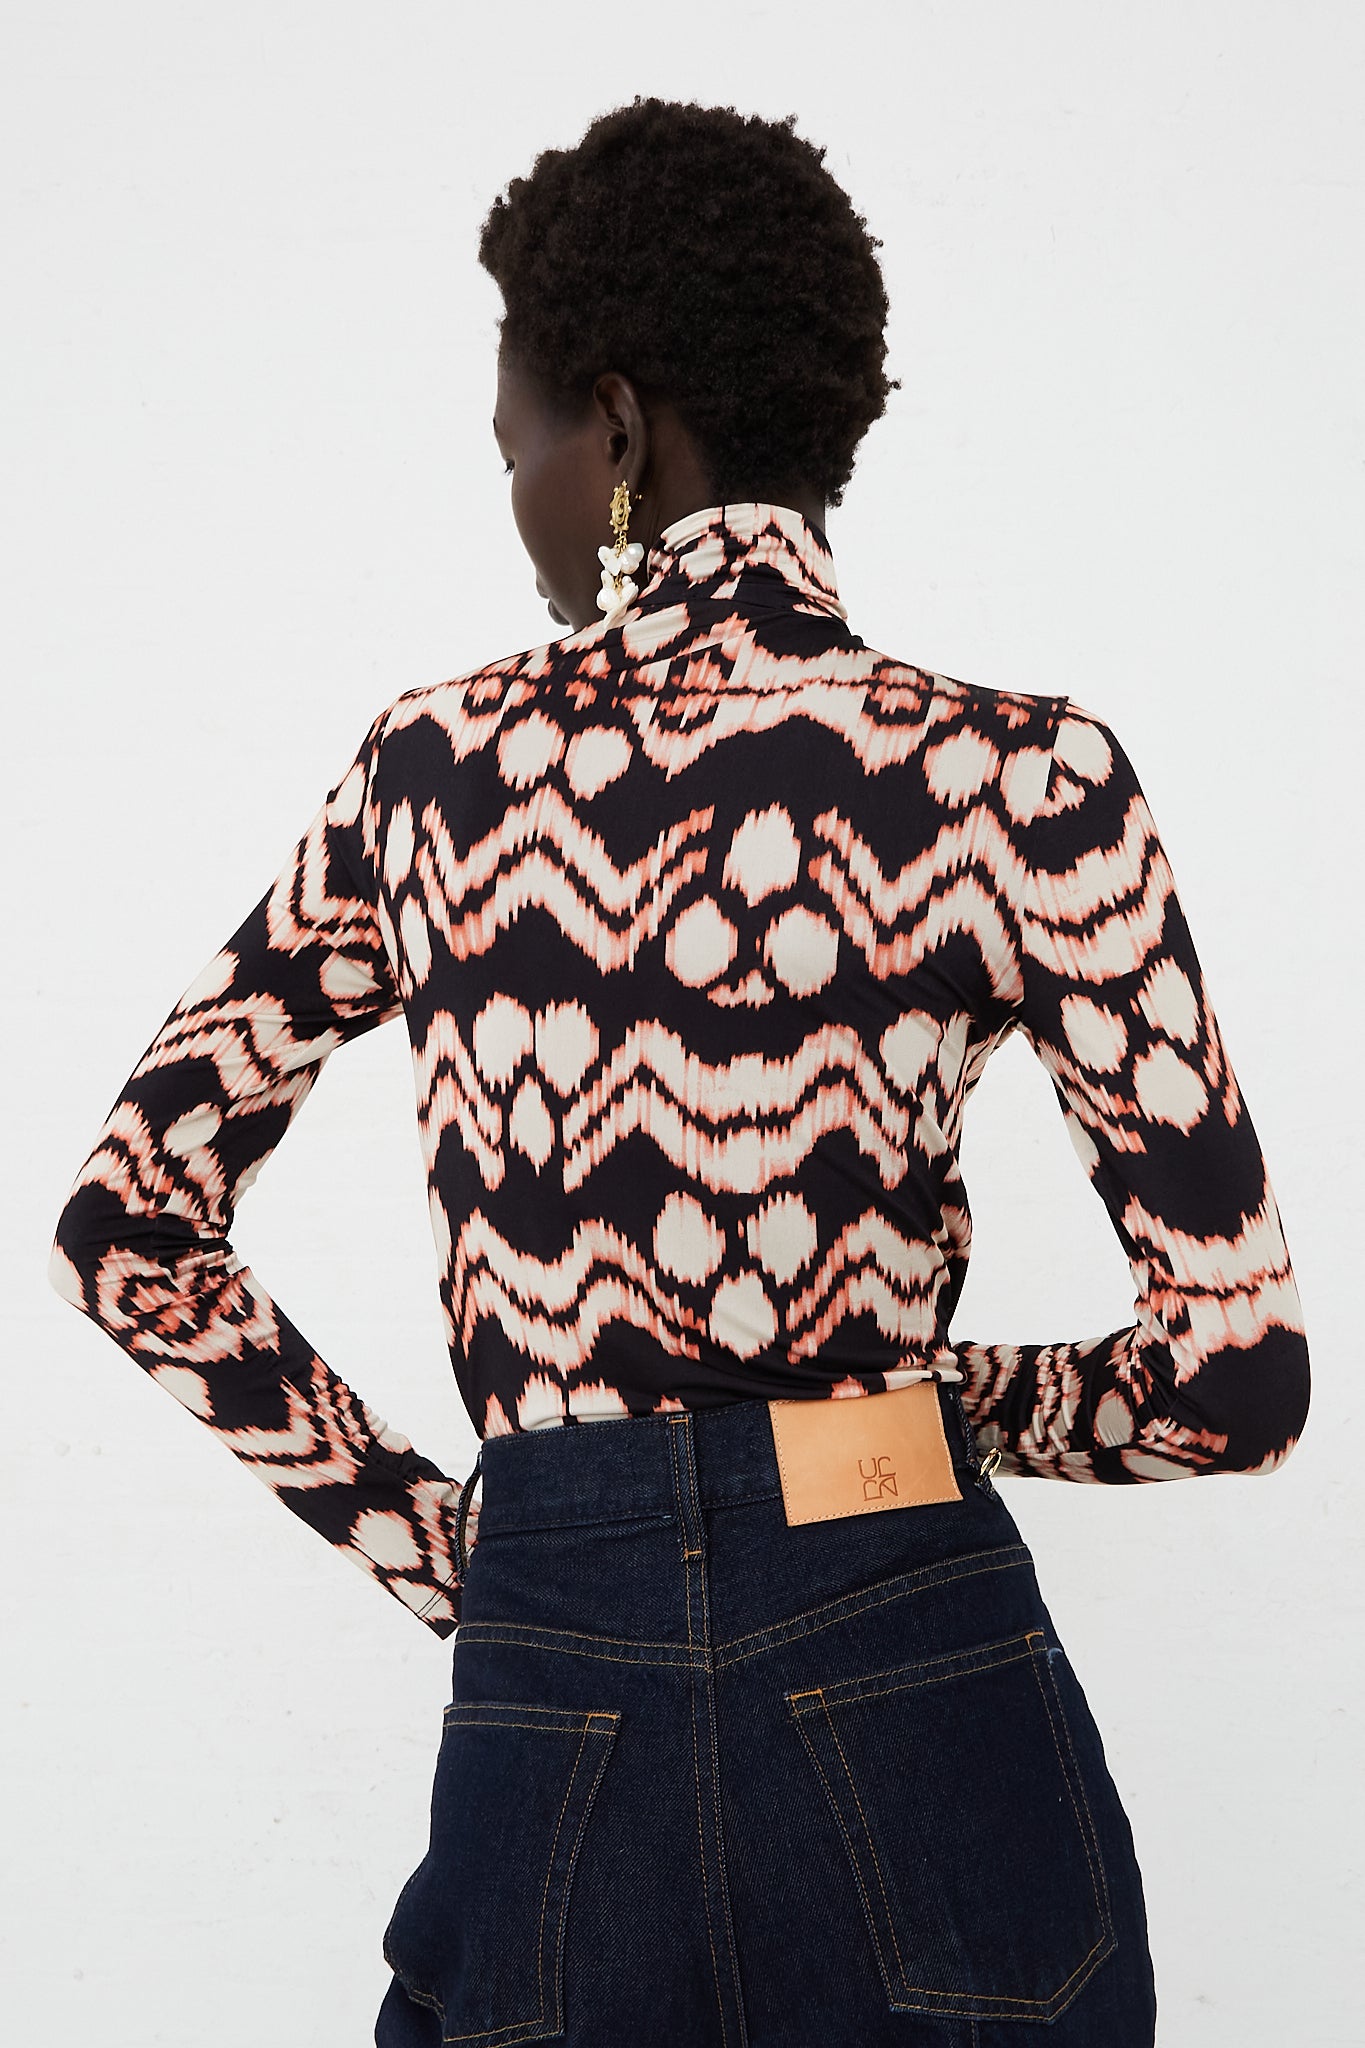 Aurelia Jersey Turtleneck in Obsidian by Ulla Johnson for Oroboro Front Back